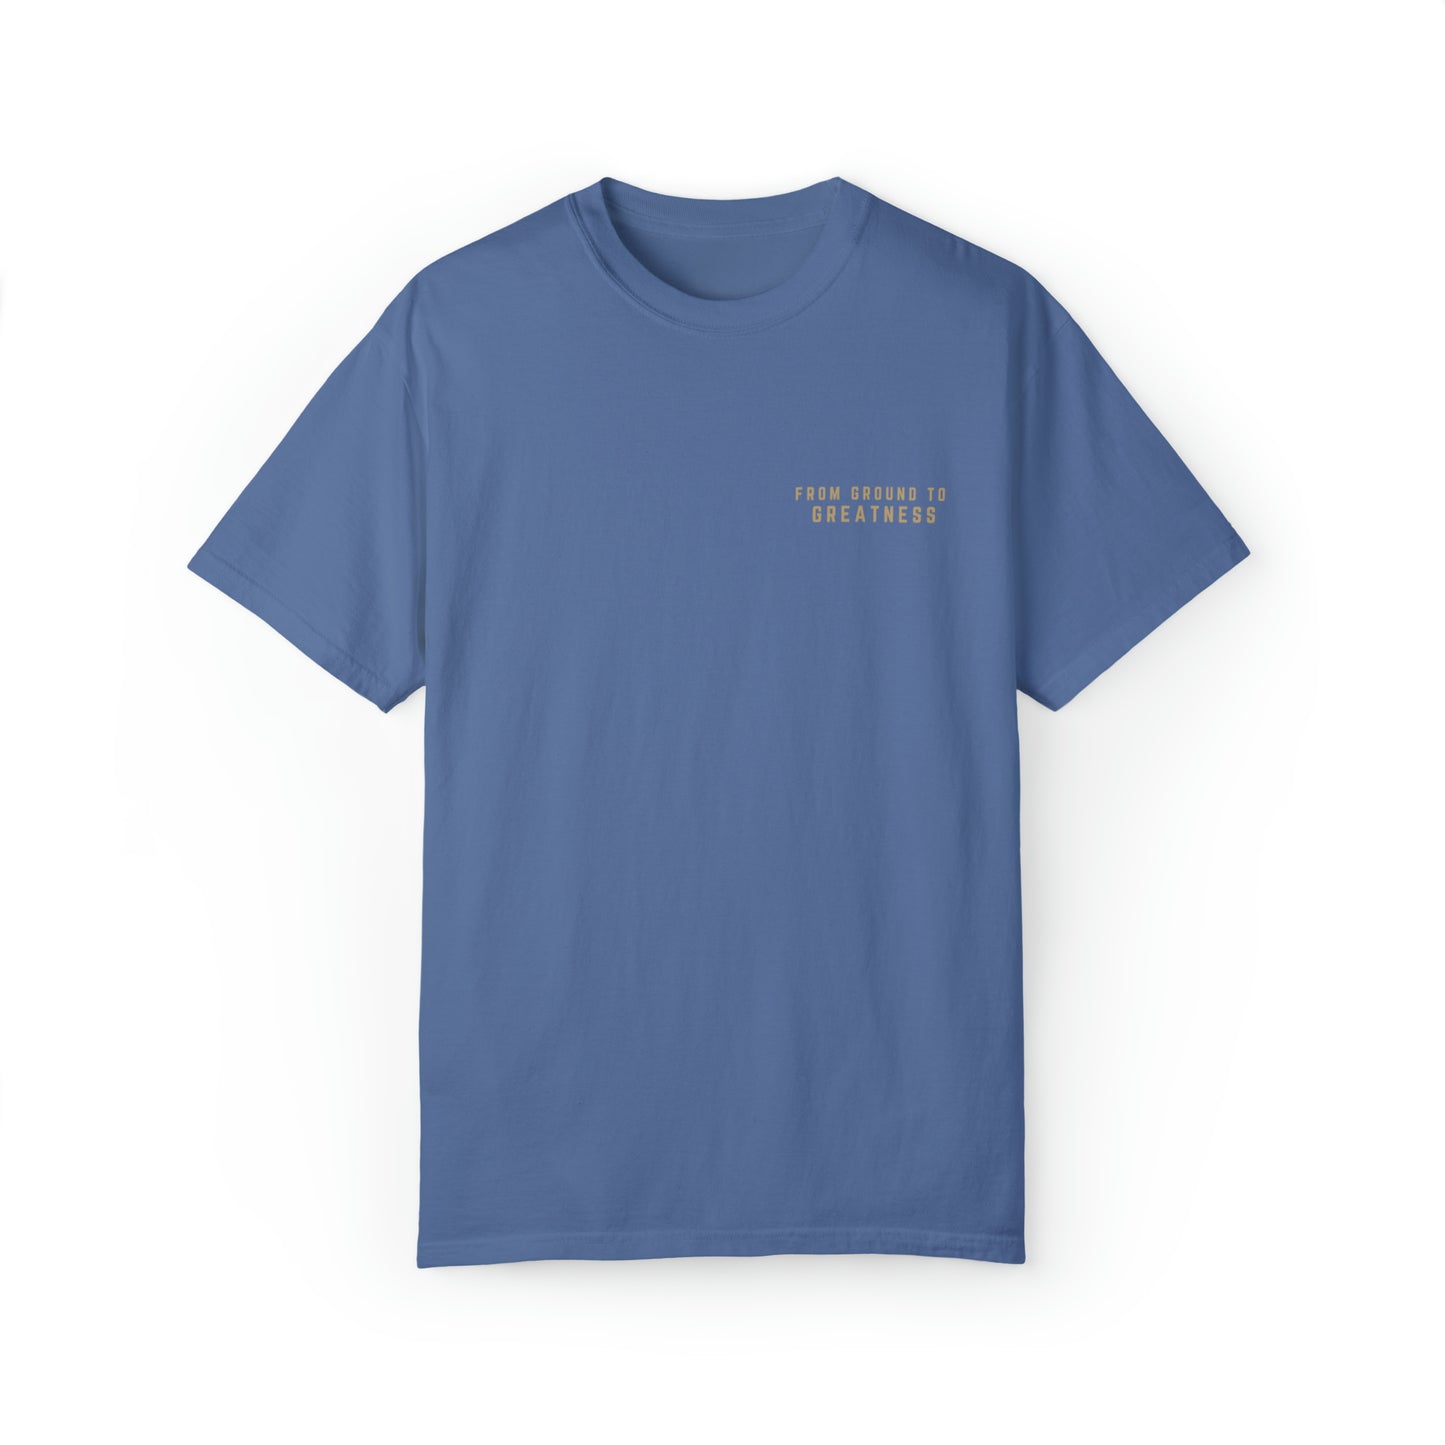 From Ground To Greatness T-Shirt